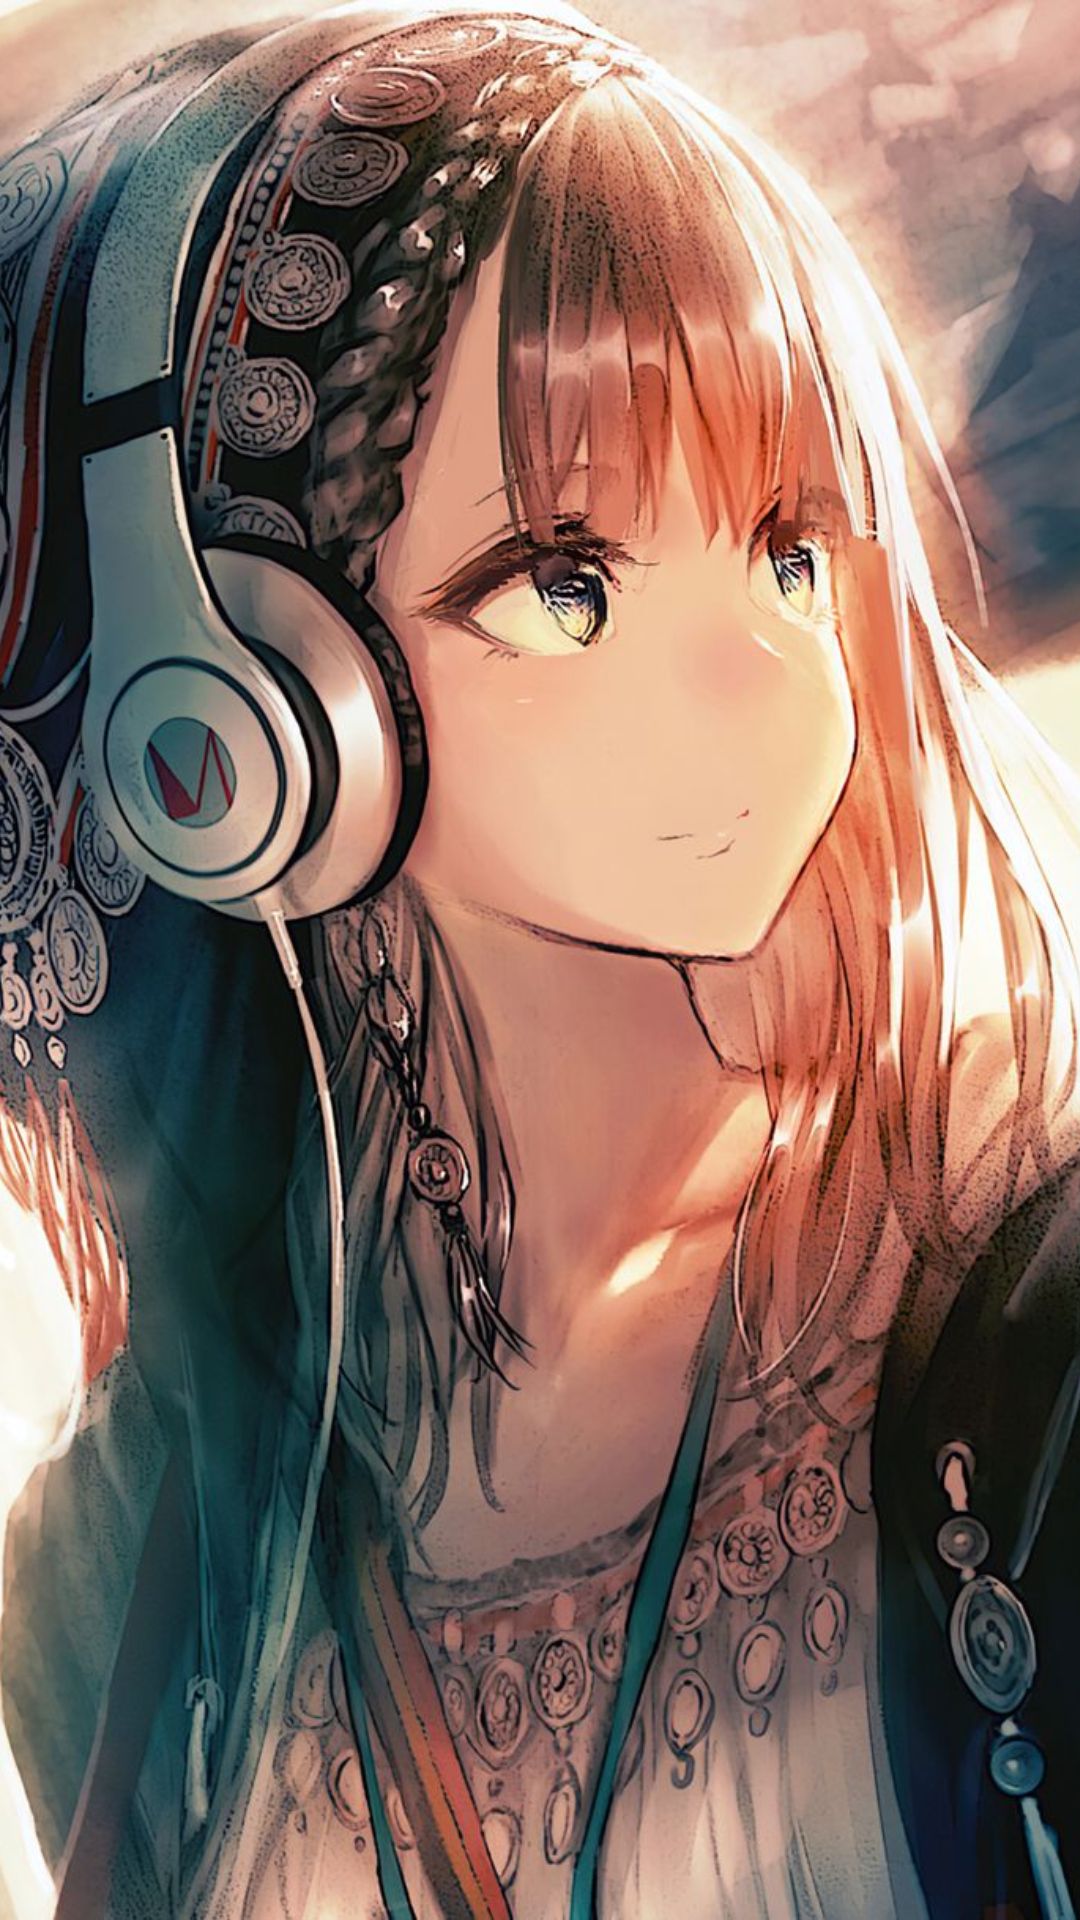 Anime Listening to Music Wallpapers - Top 35 Best Anime Listening to Music  Wallpapers Download